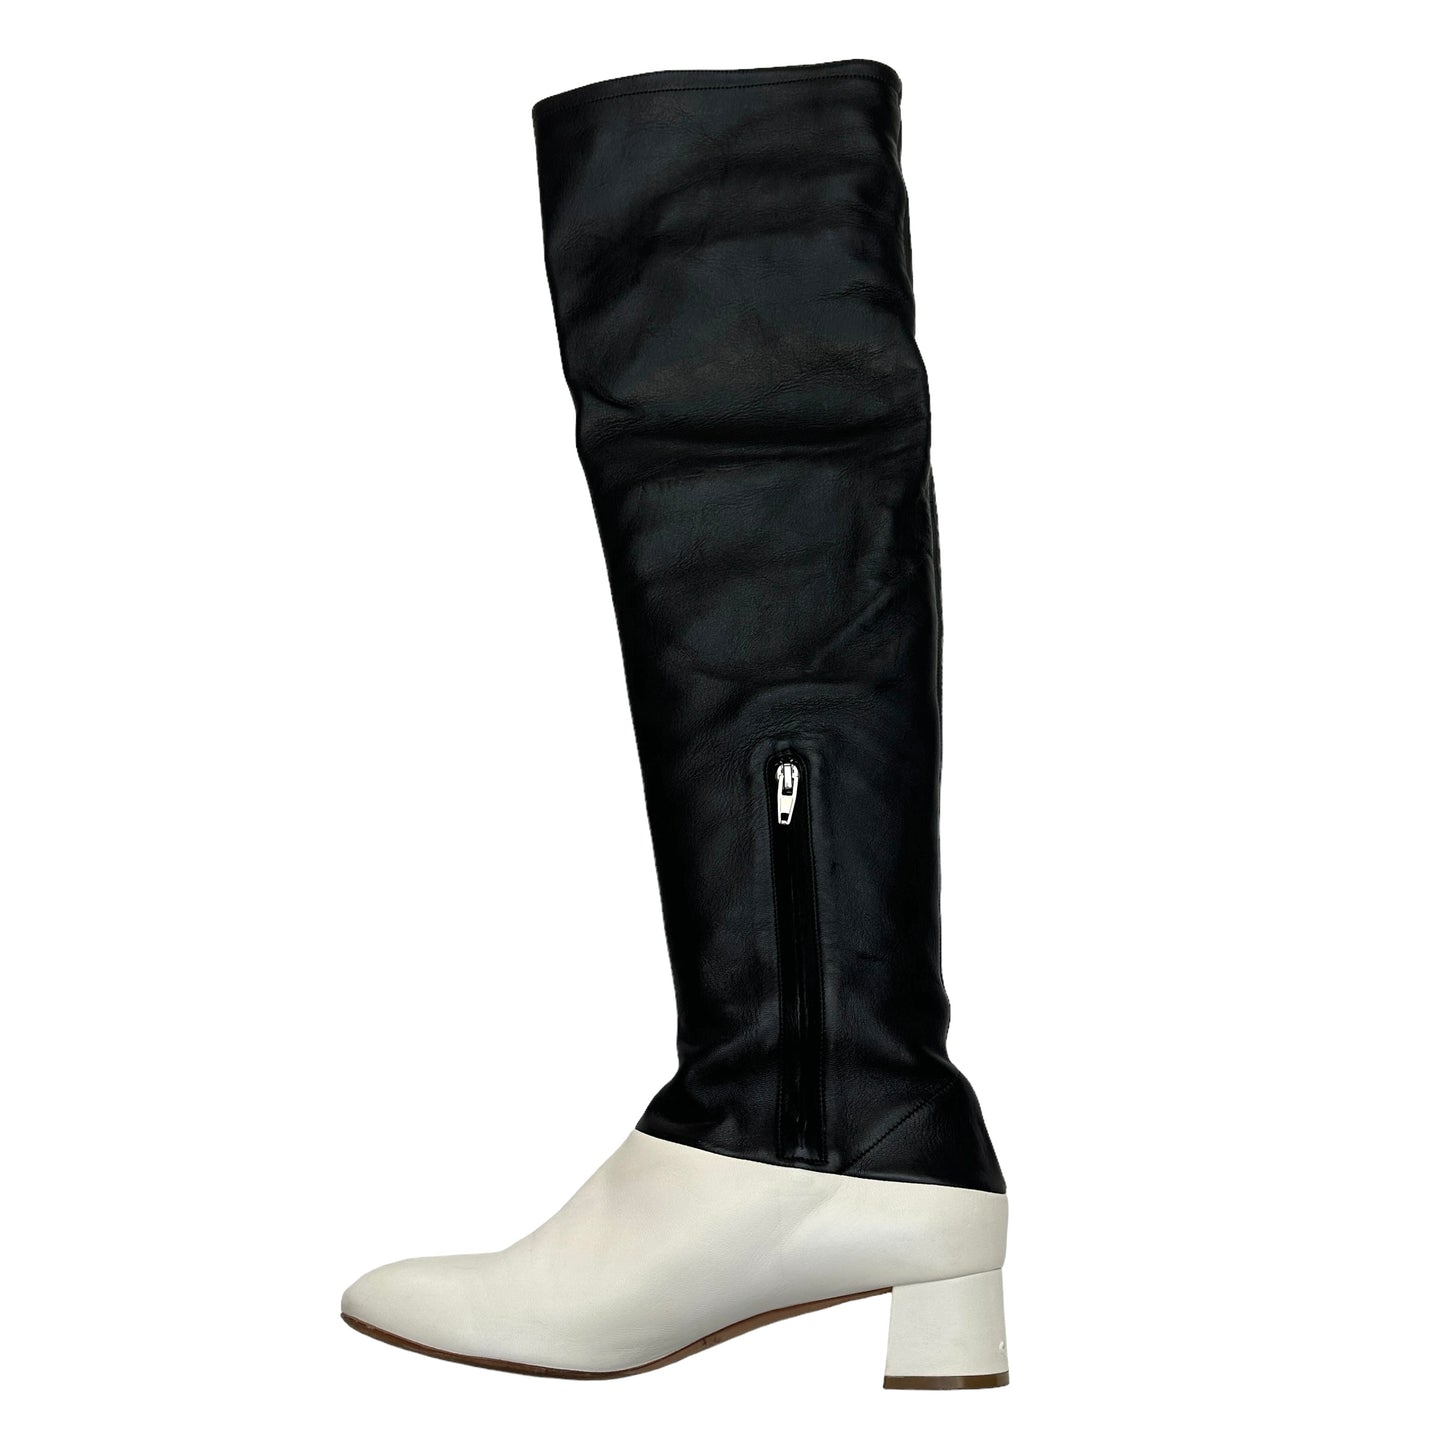 Black & White Tall Boots - 10